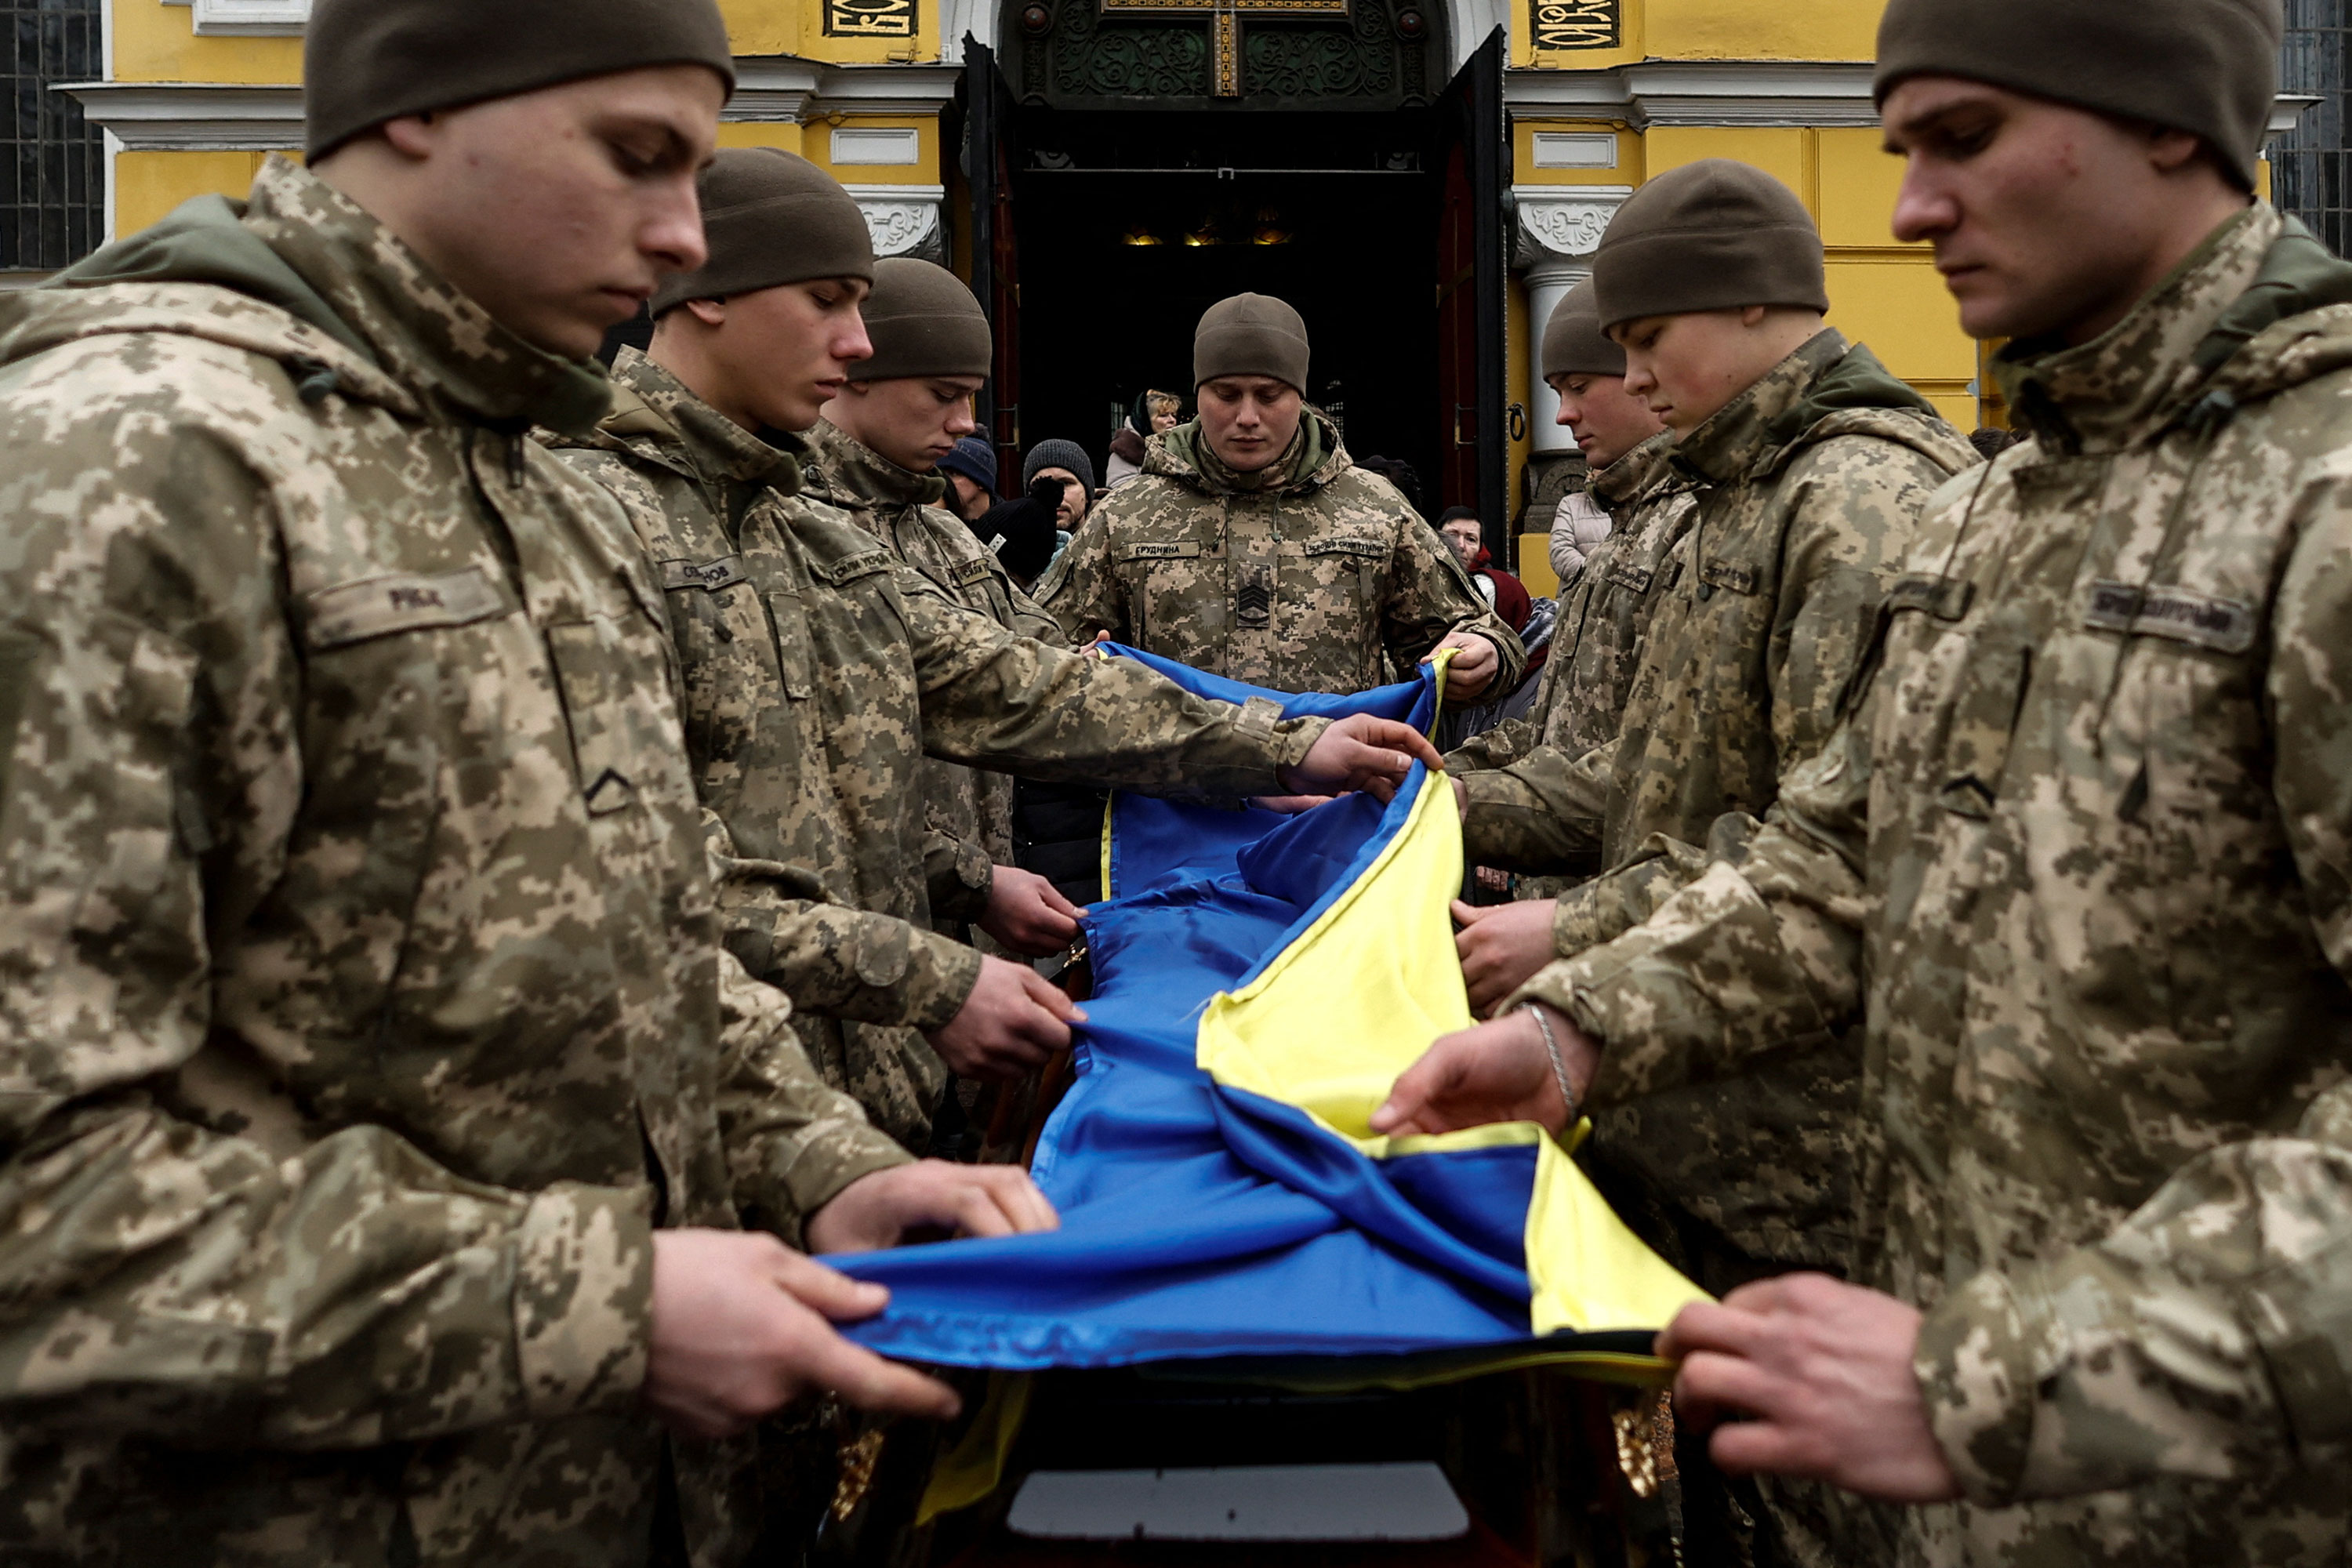 Members of the Honour Guard fold a national flag in Kyiv, Ukraine, on Tuesday over a coffin with the body of a Ukrainian serviceman killed near Bakhmut.